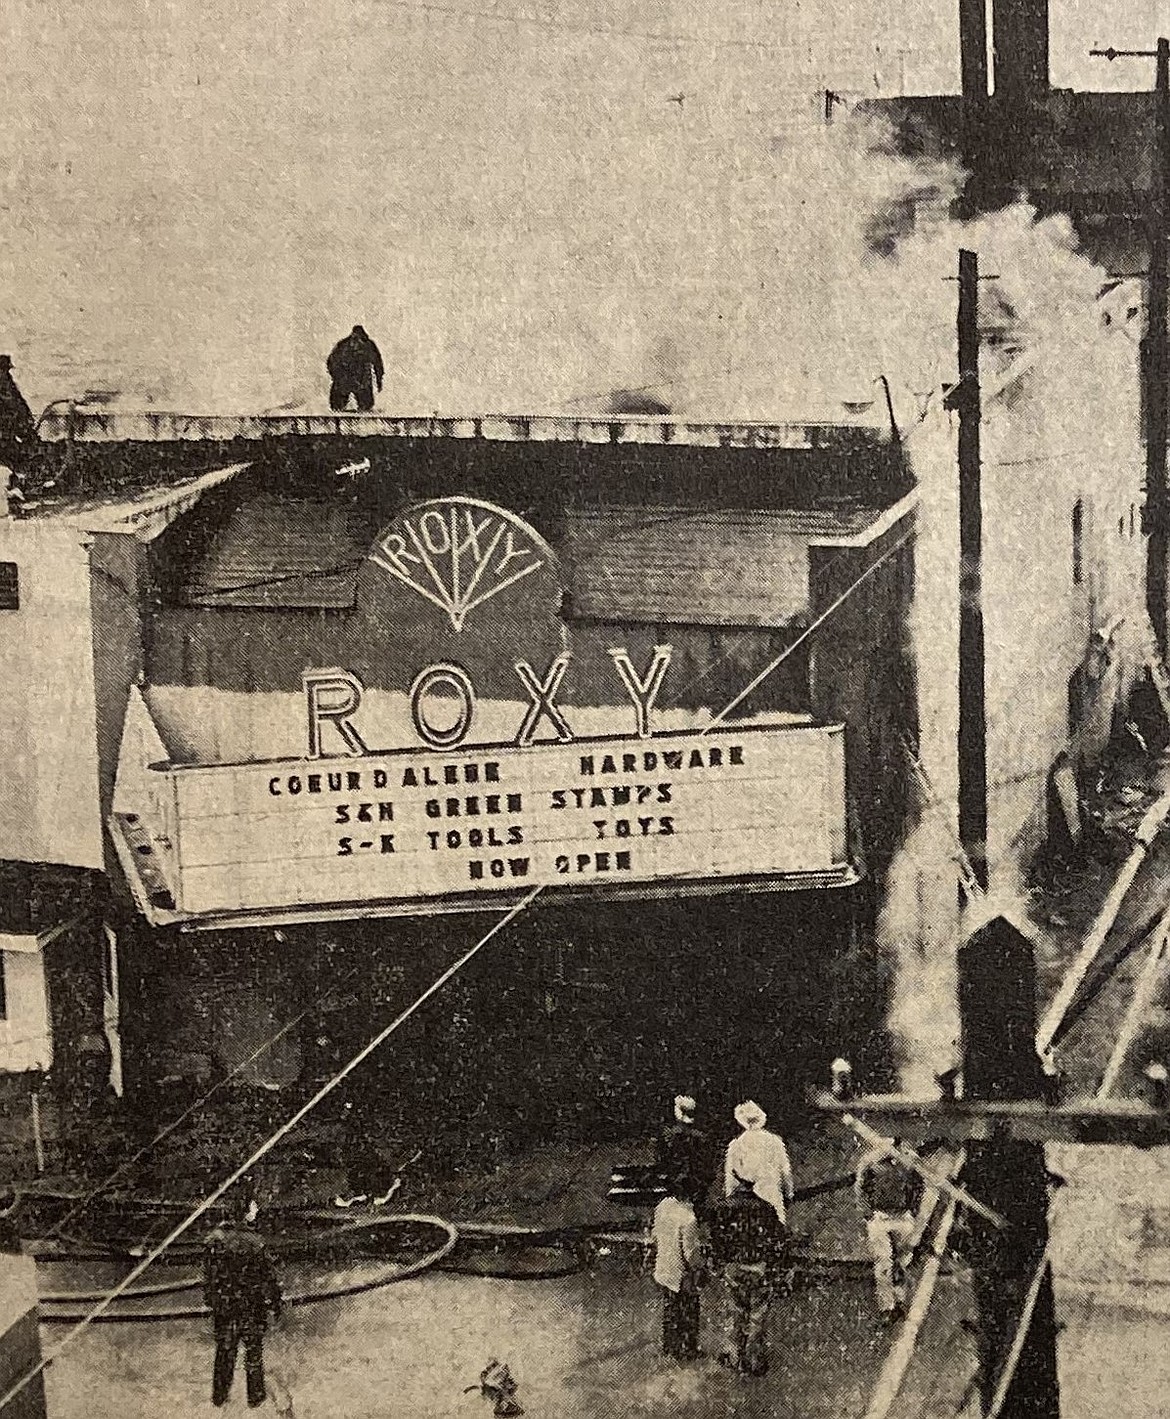 The marquee of the old Roxy theater helped save four lives.